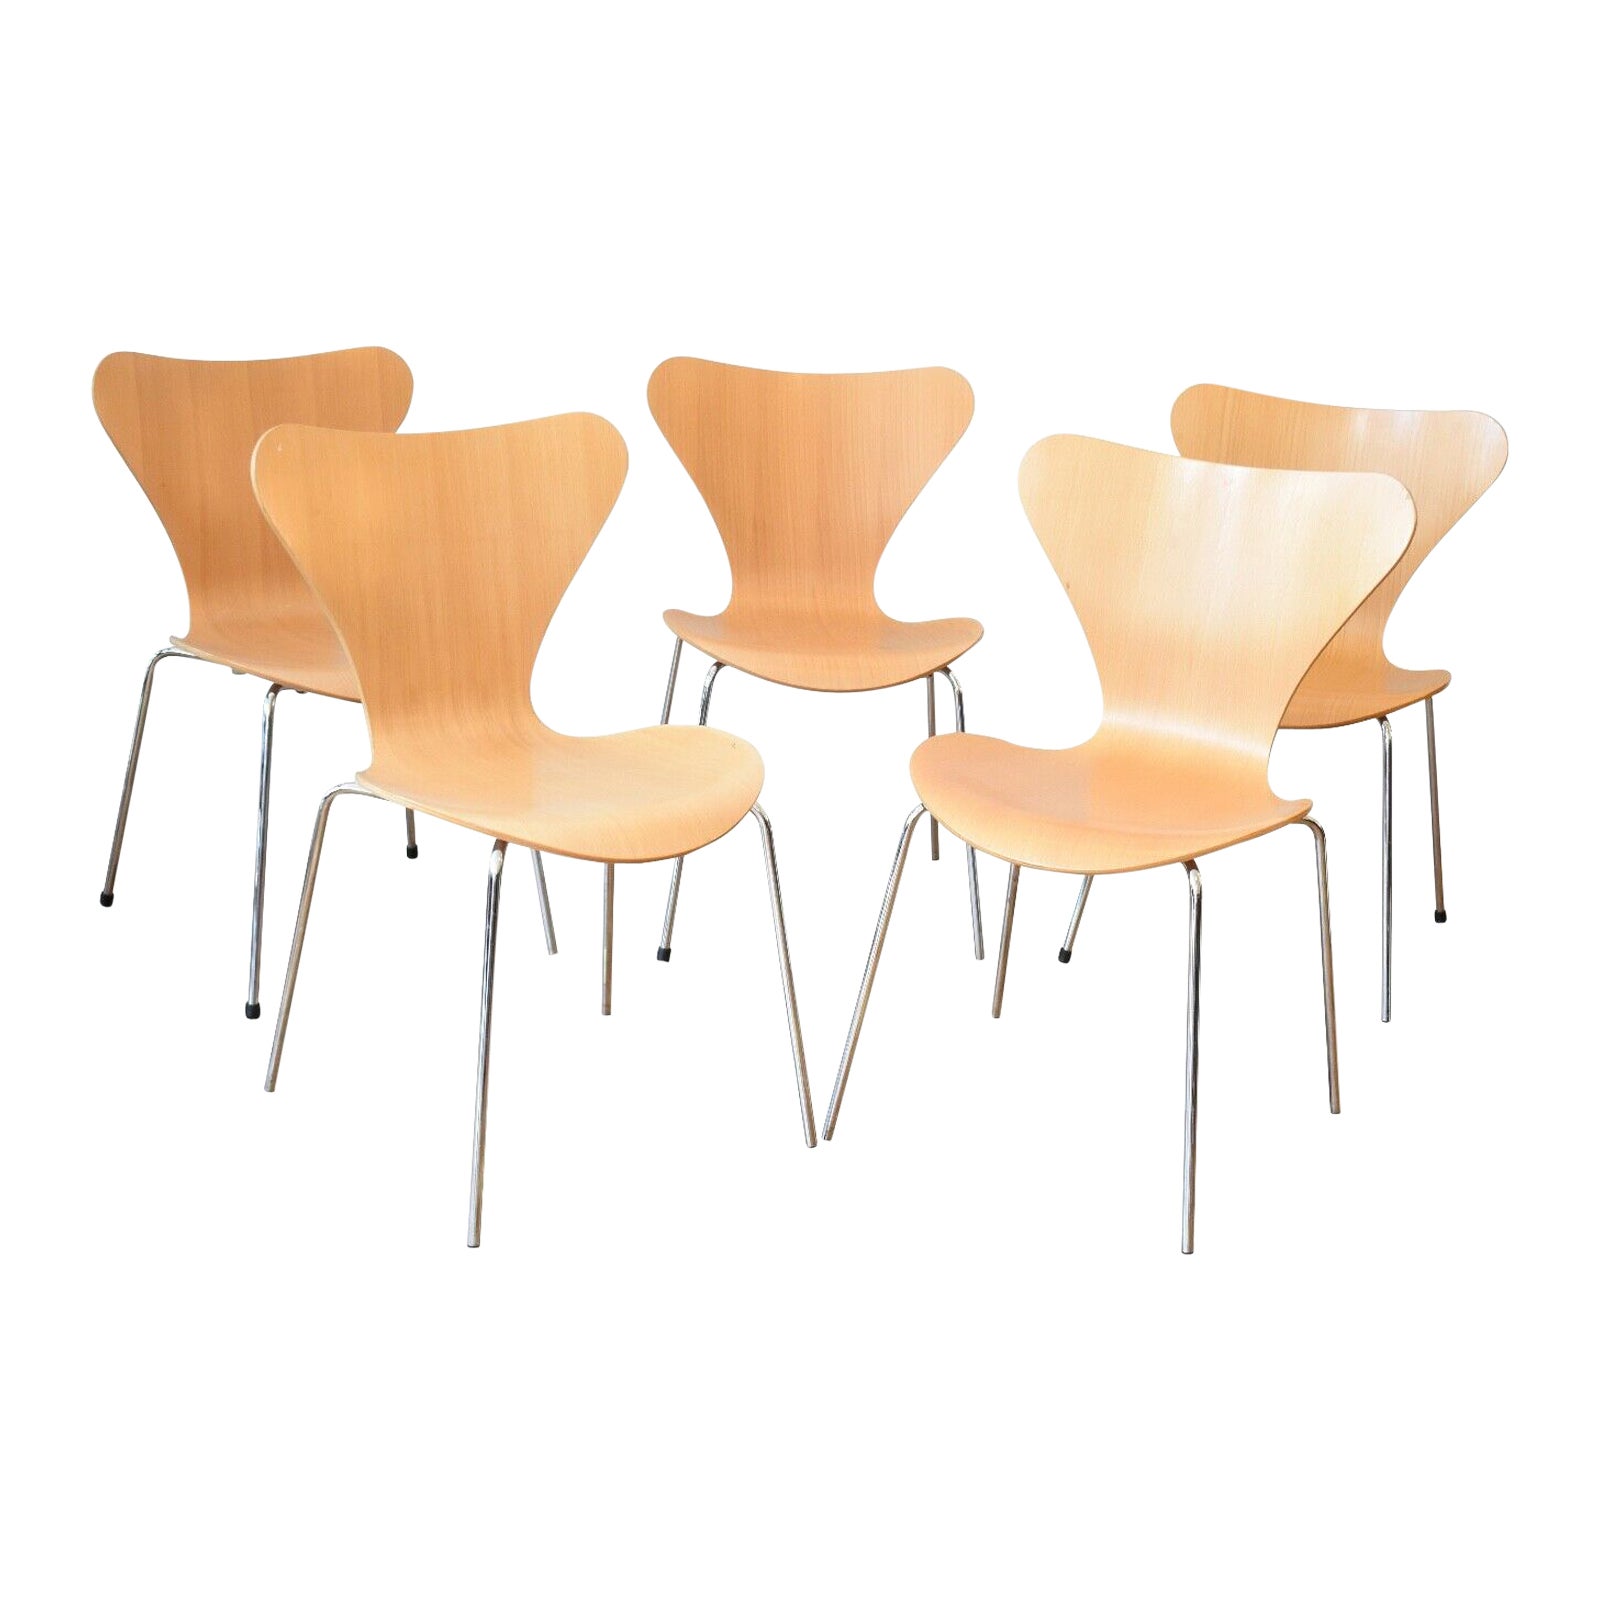 Set of 6 Arne Jacobson for Fritz Hansen Series 7 Dining Chairs